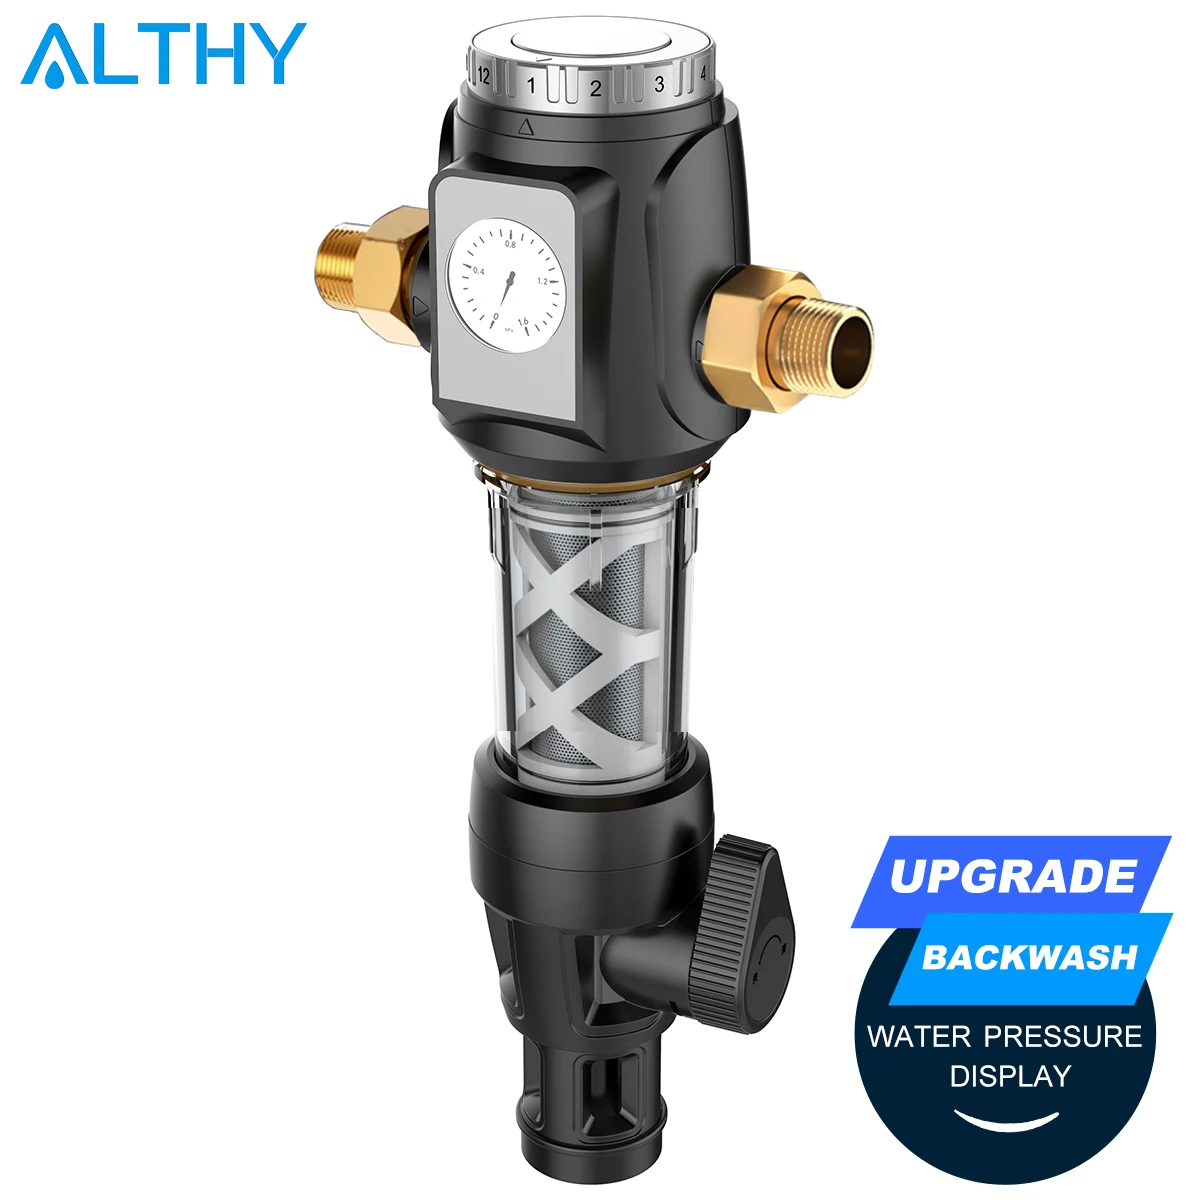 

ALTHY Central Prefilter Whole House Pre-filter Water Filter Purifier Siphon backwash 3T/h 40Î¼m with water Pressure Gauge